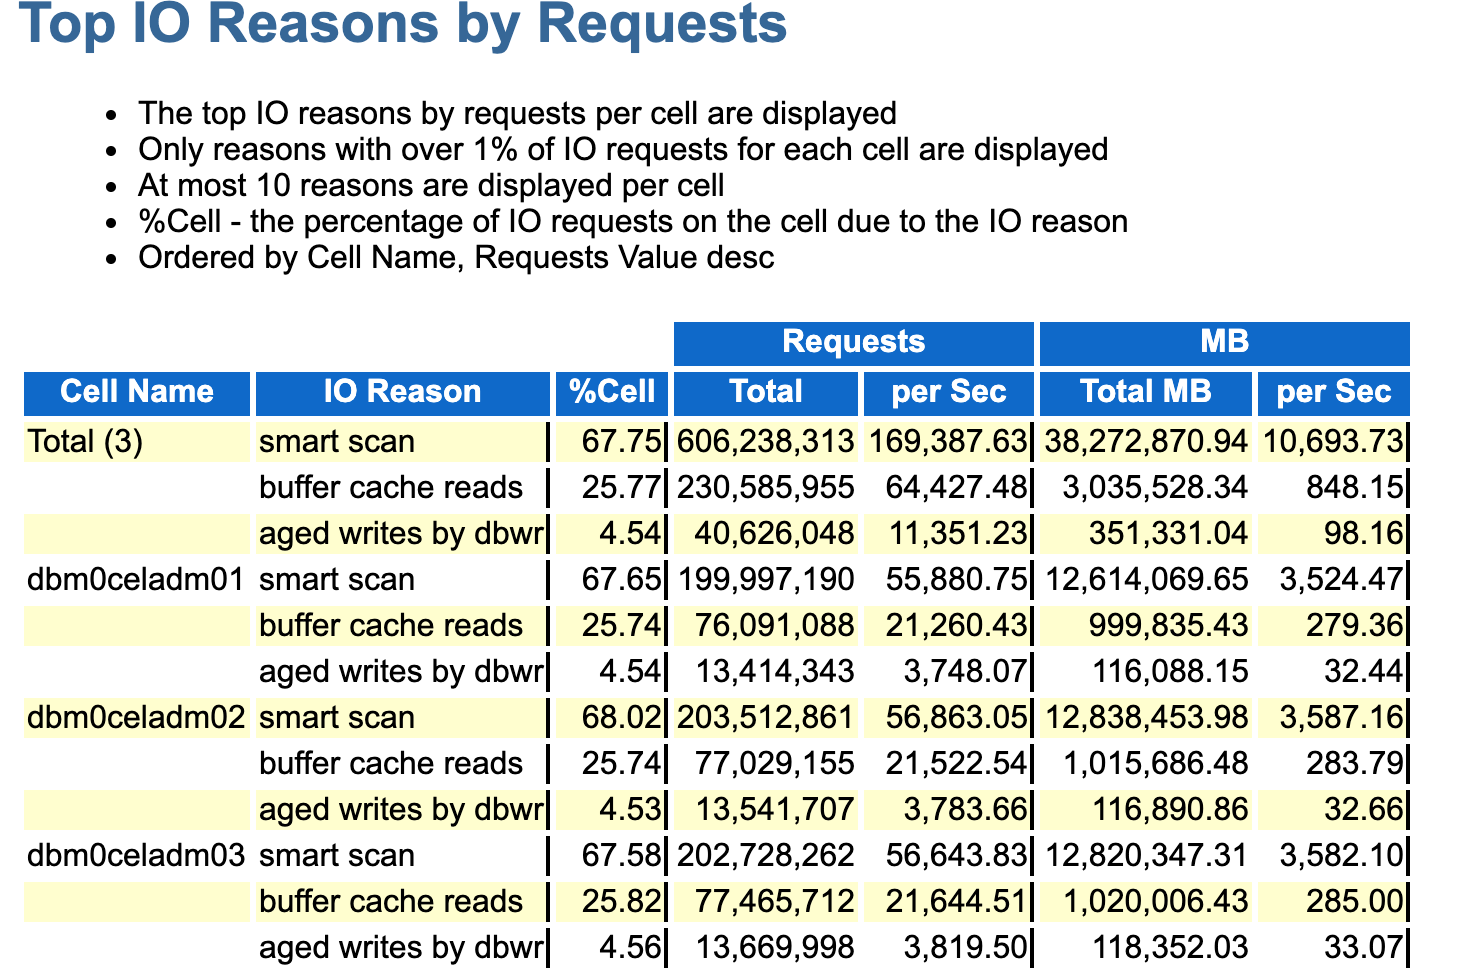 The image shows an example of the Top IO Reasons by Request section in the AWR report.